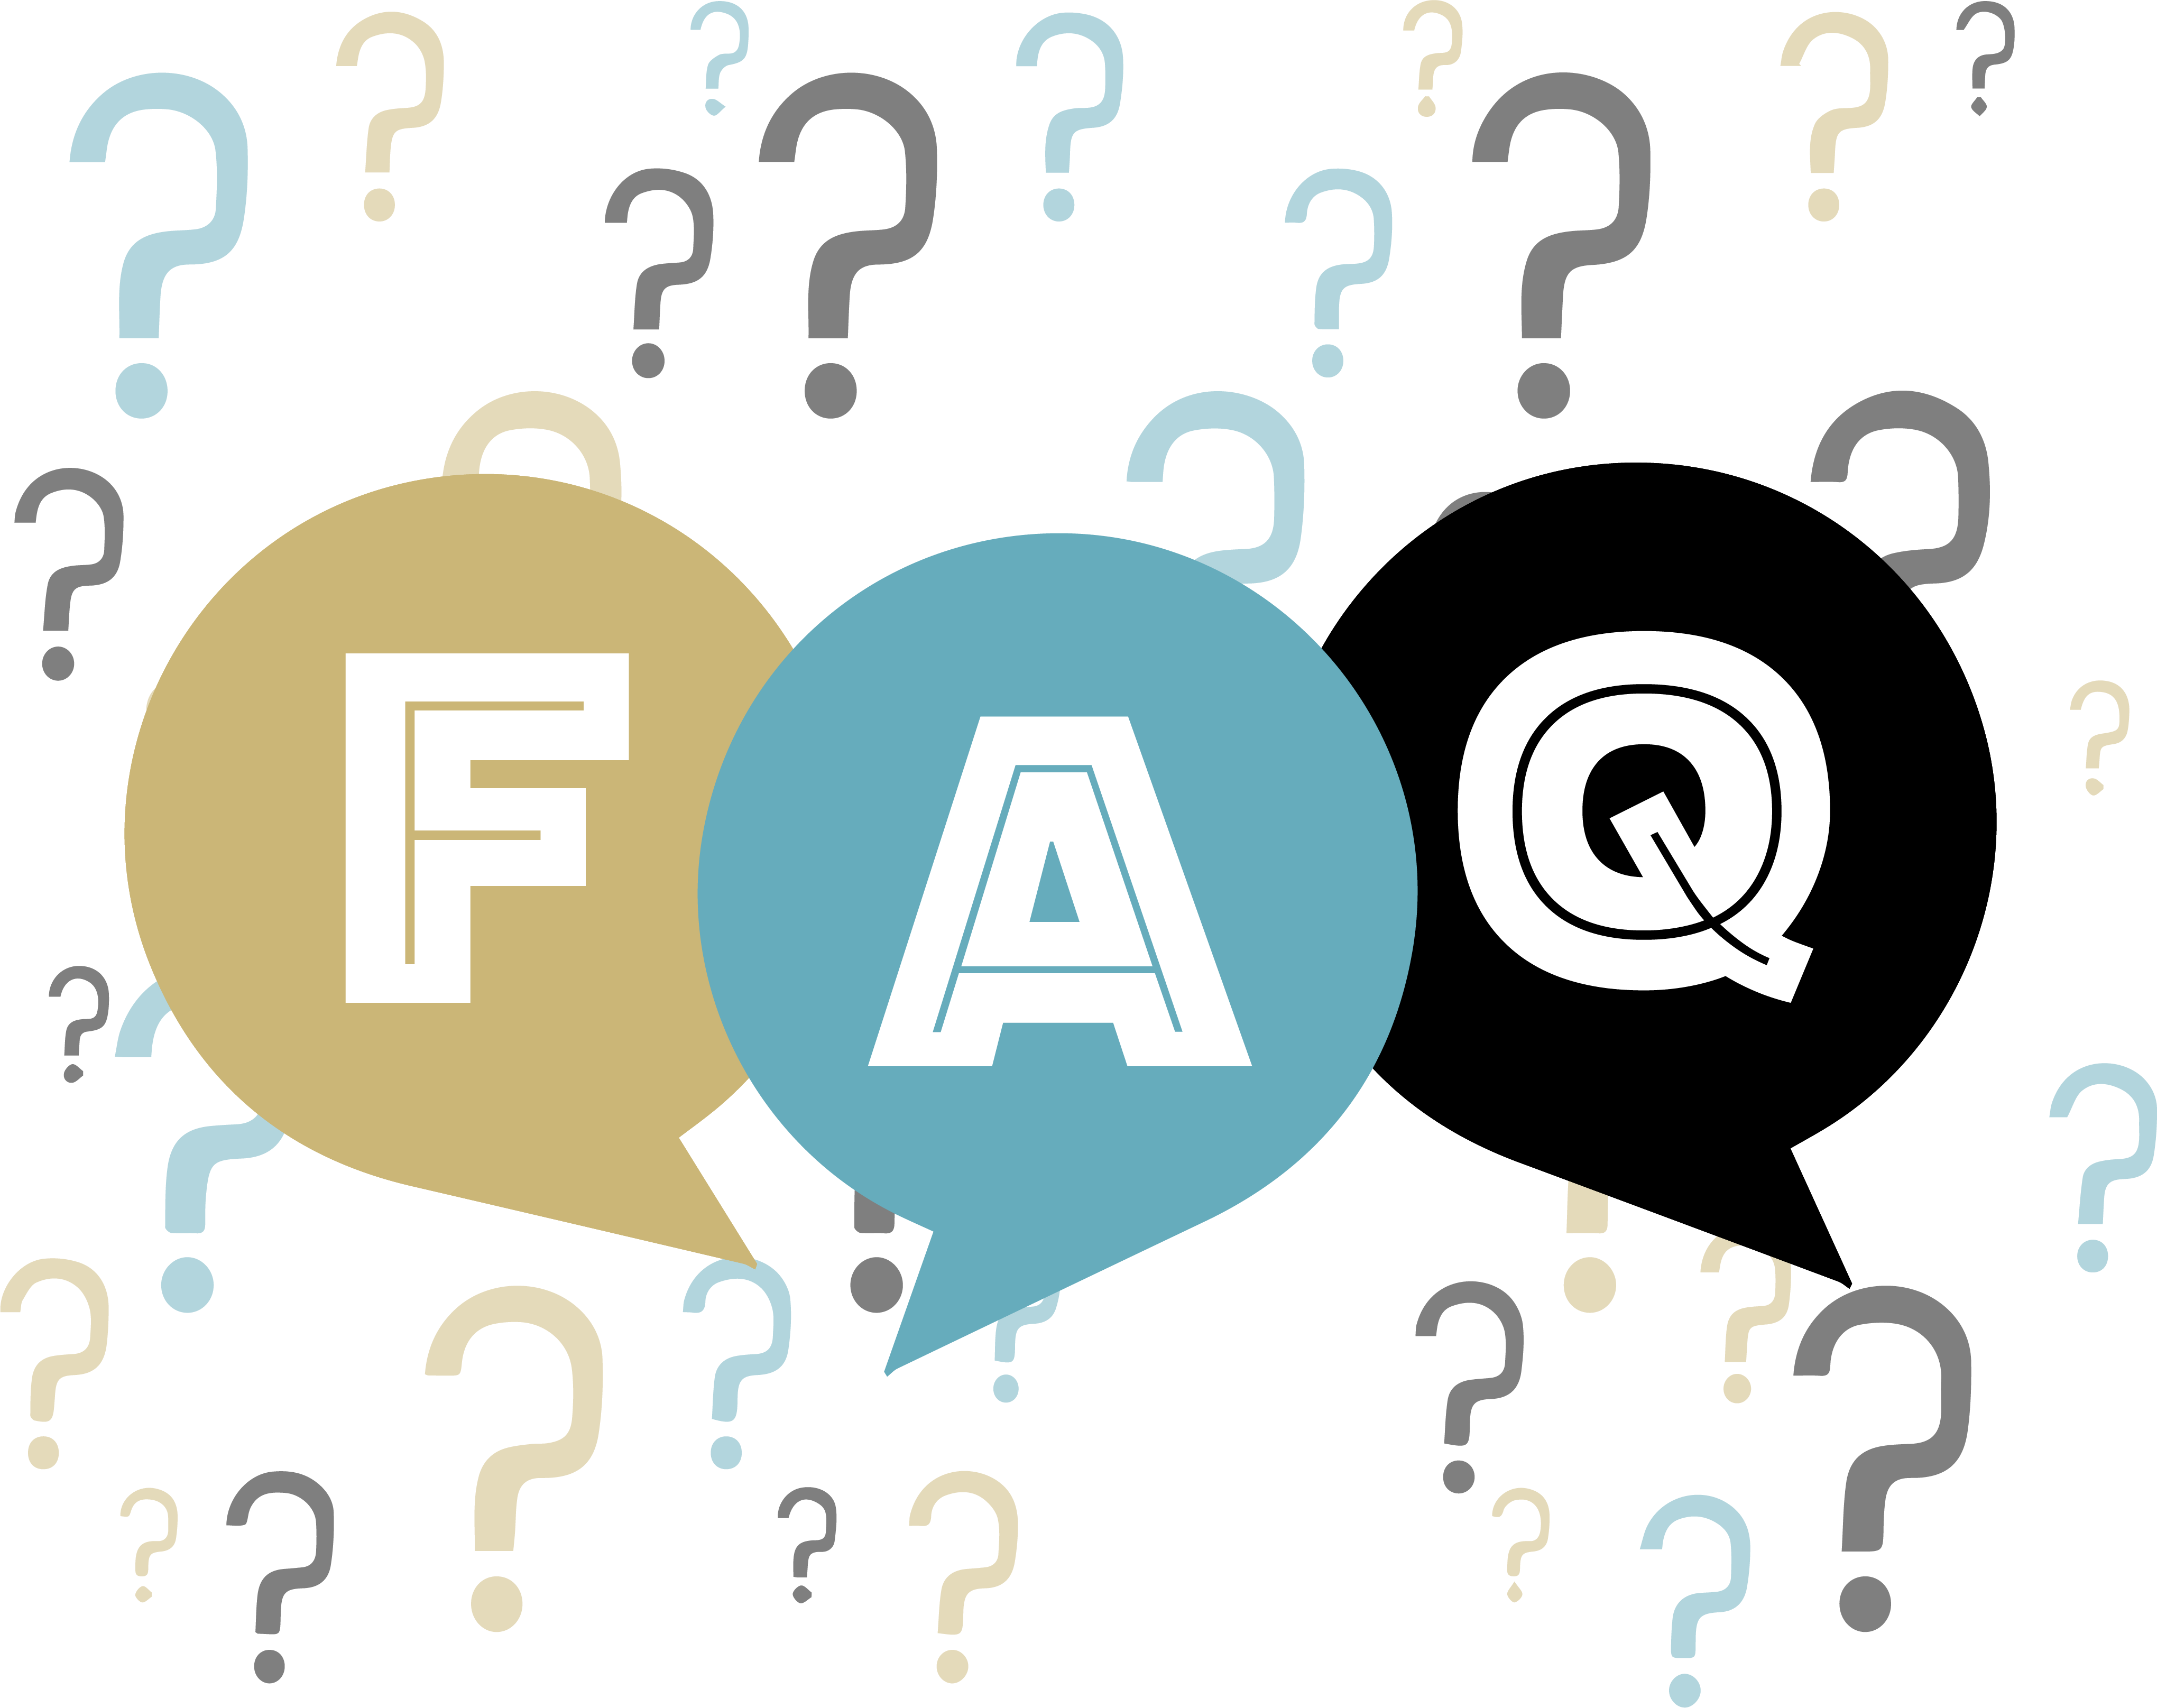 Frequently asked questions link